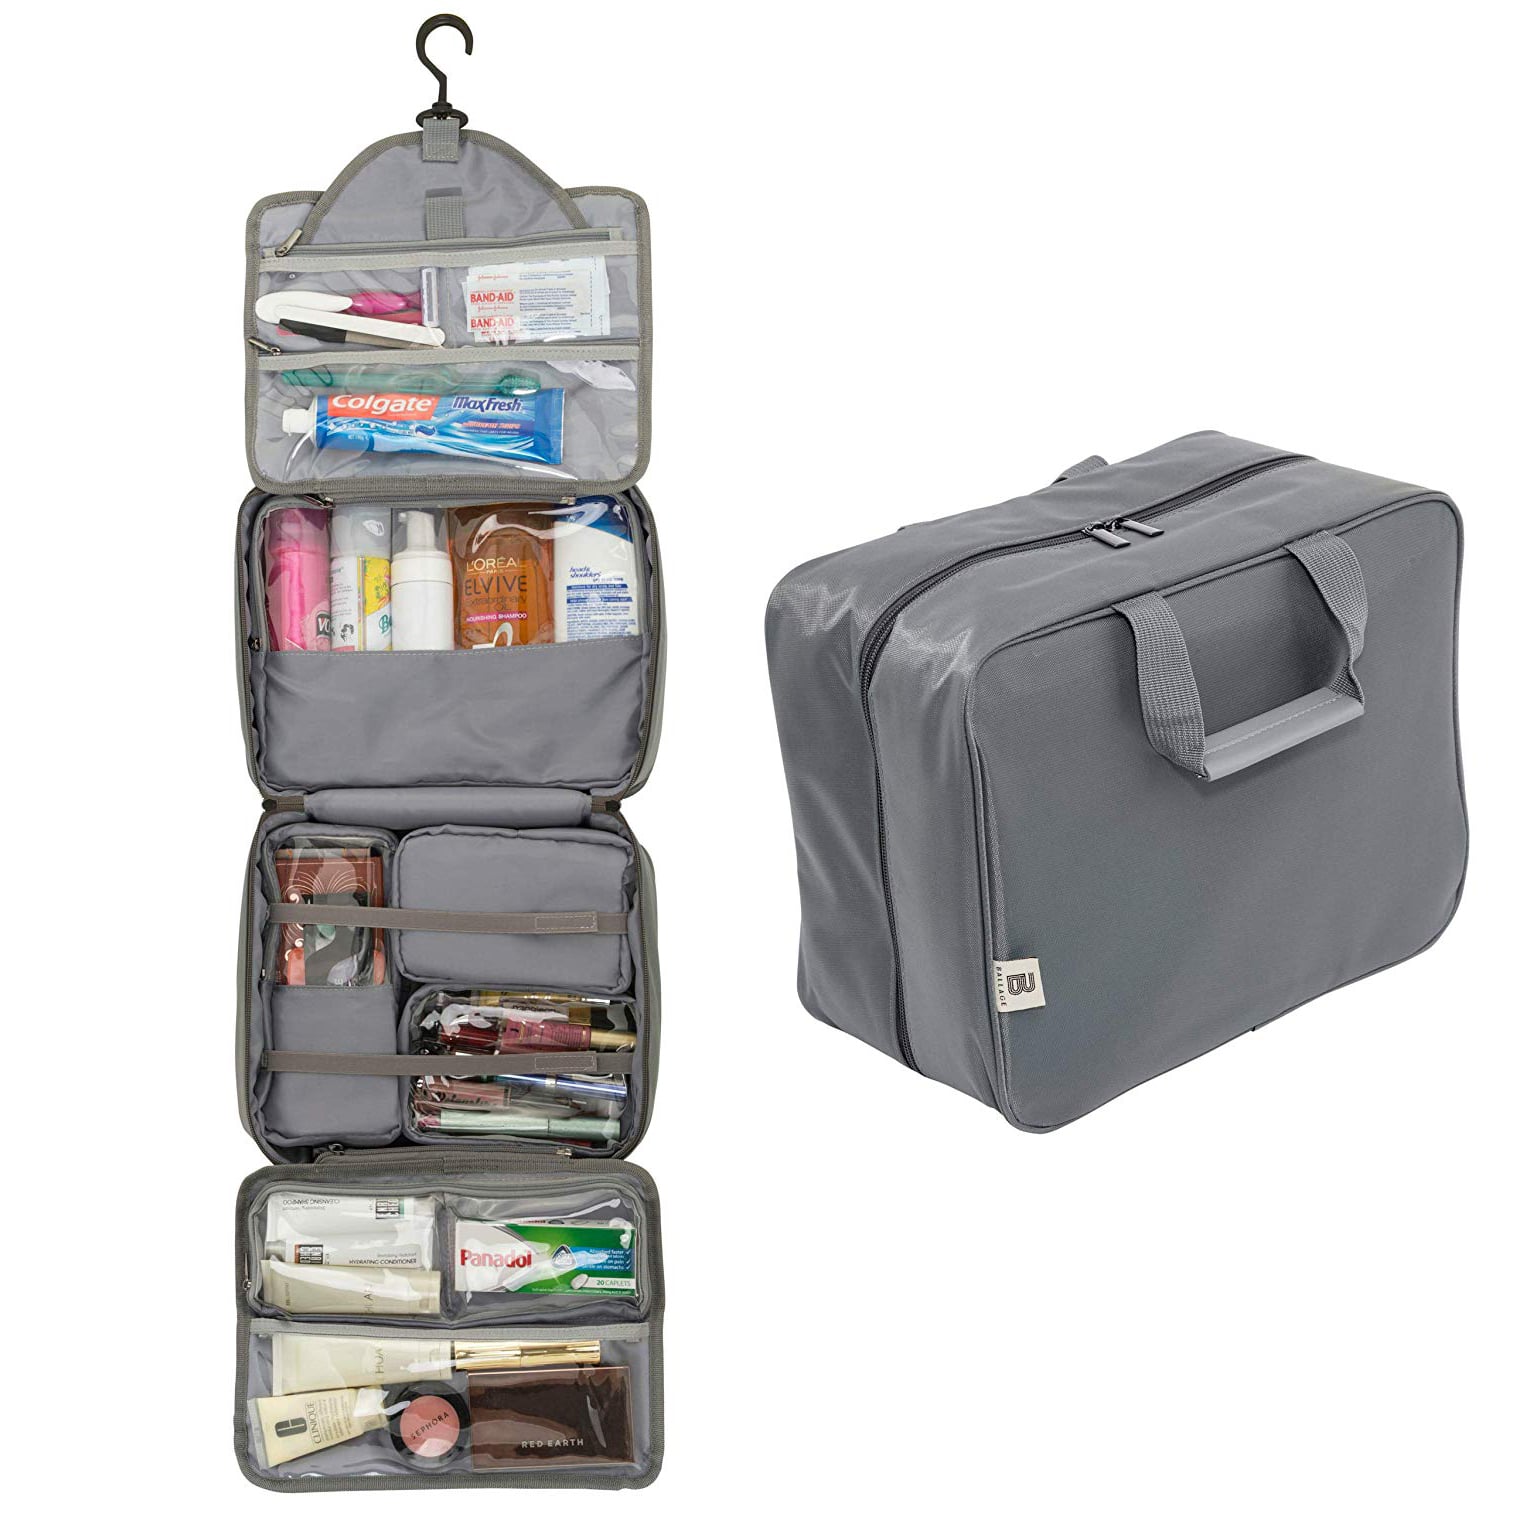 hanging travel toiletry bag nearby